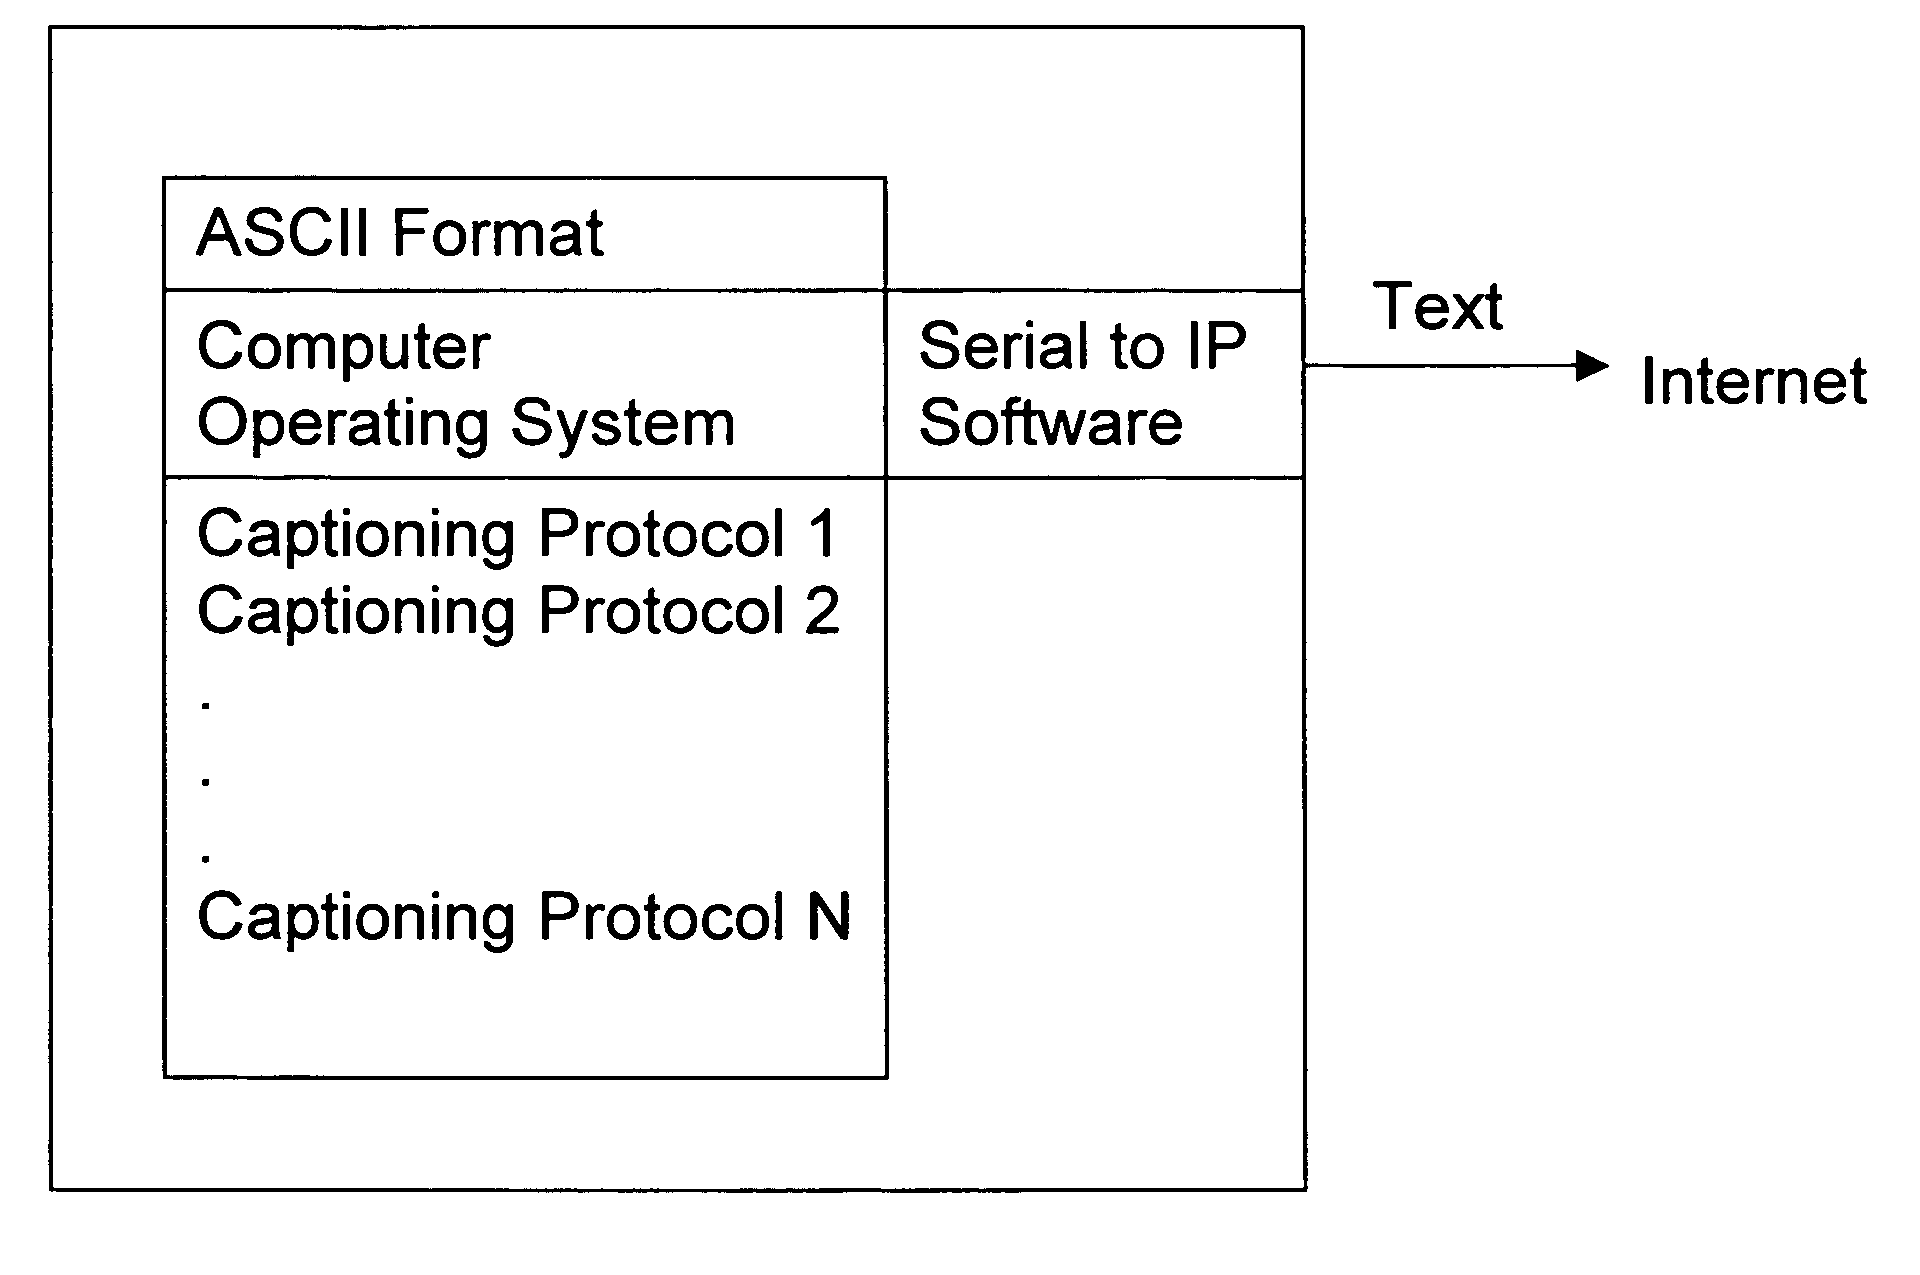 Systems and methods for automated audio transcription, translation, and transfer